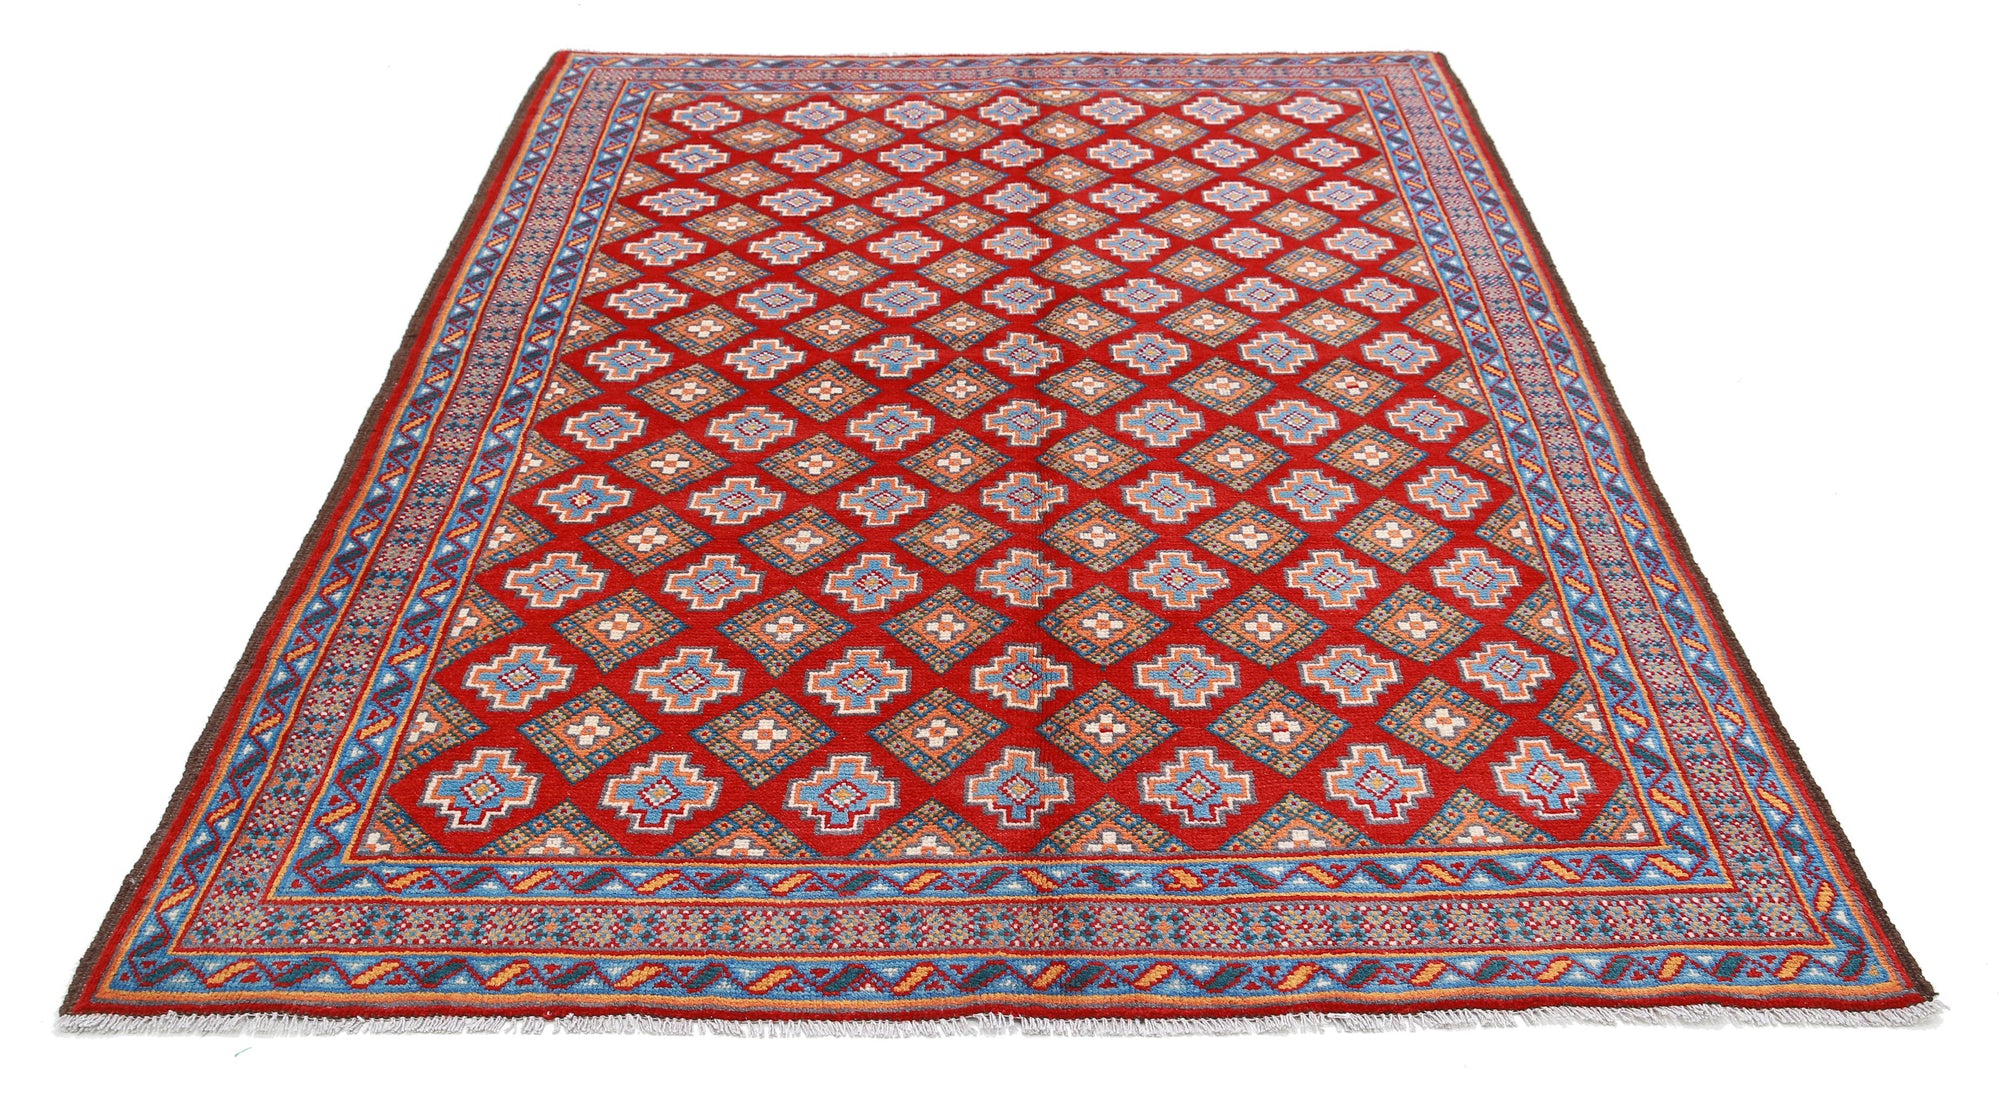 Revival-hand-knotted-qarghani-wool-rug-5014223-3.jpg